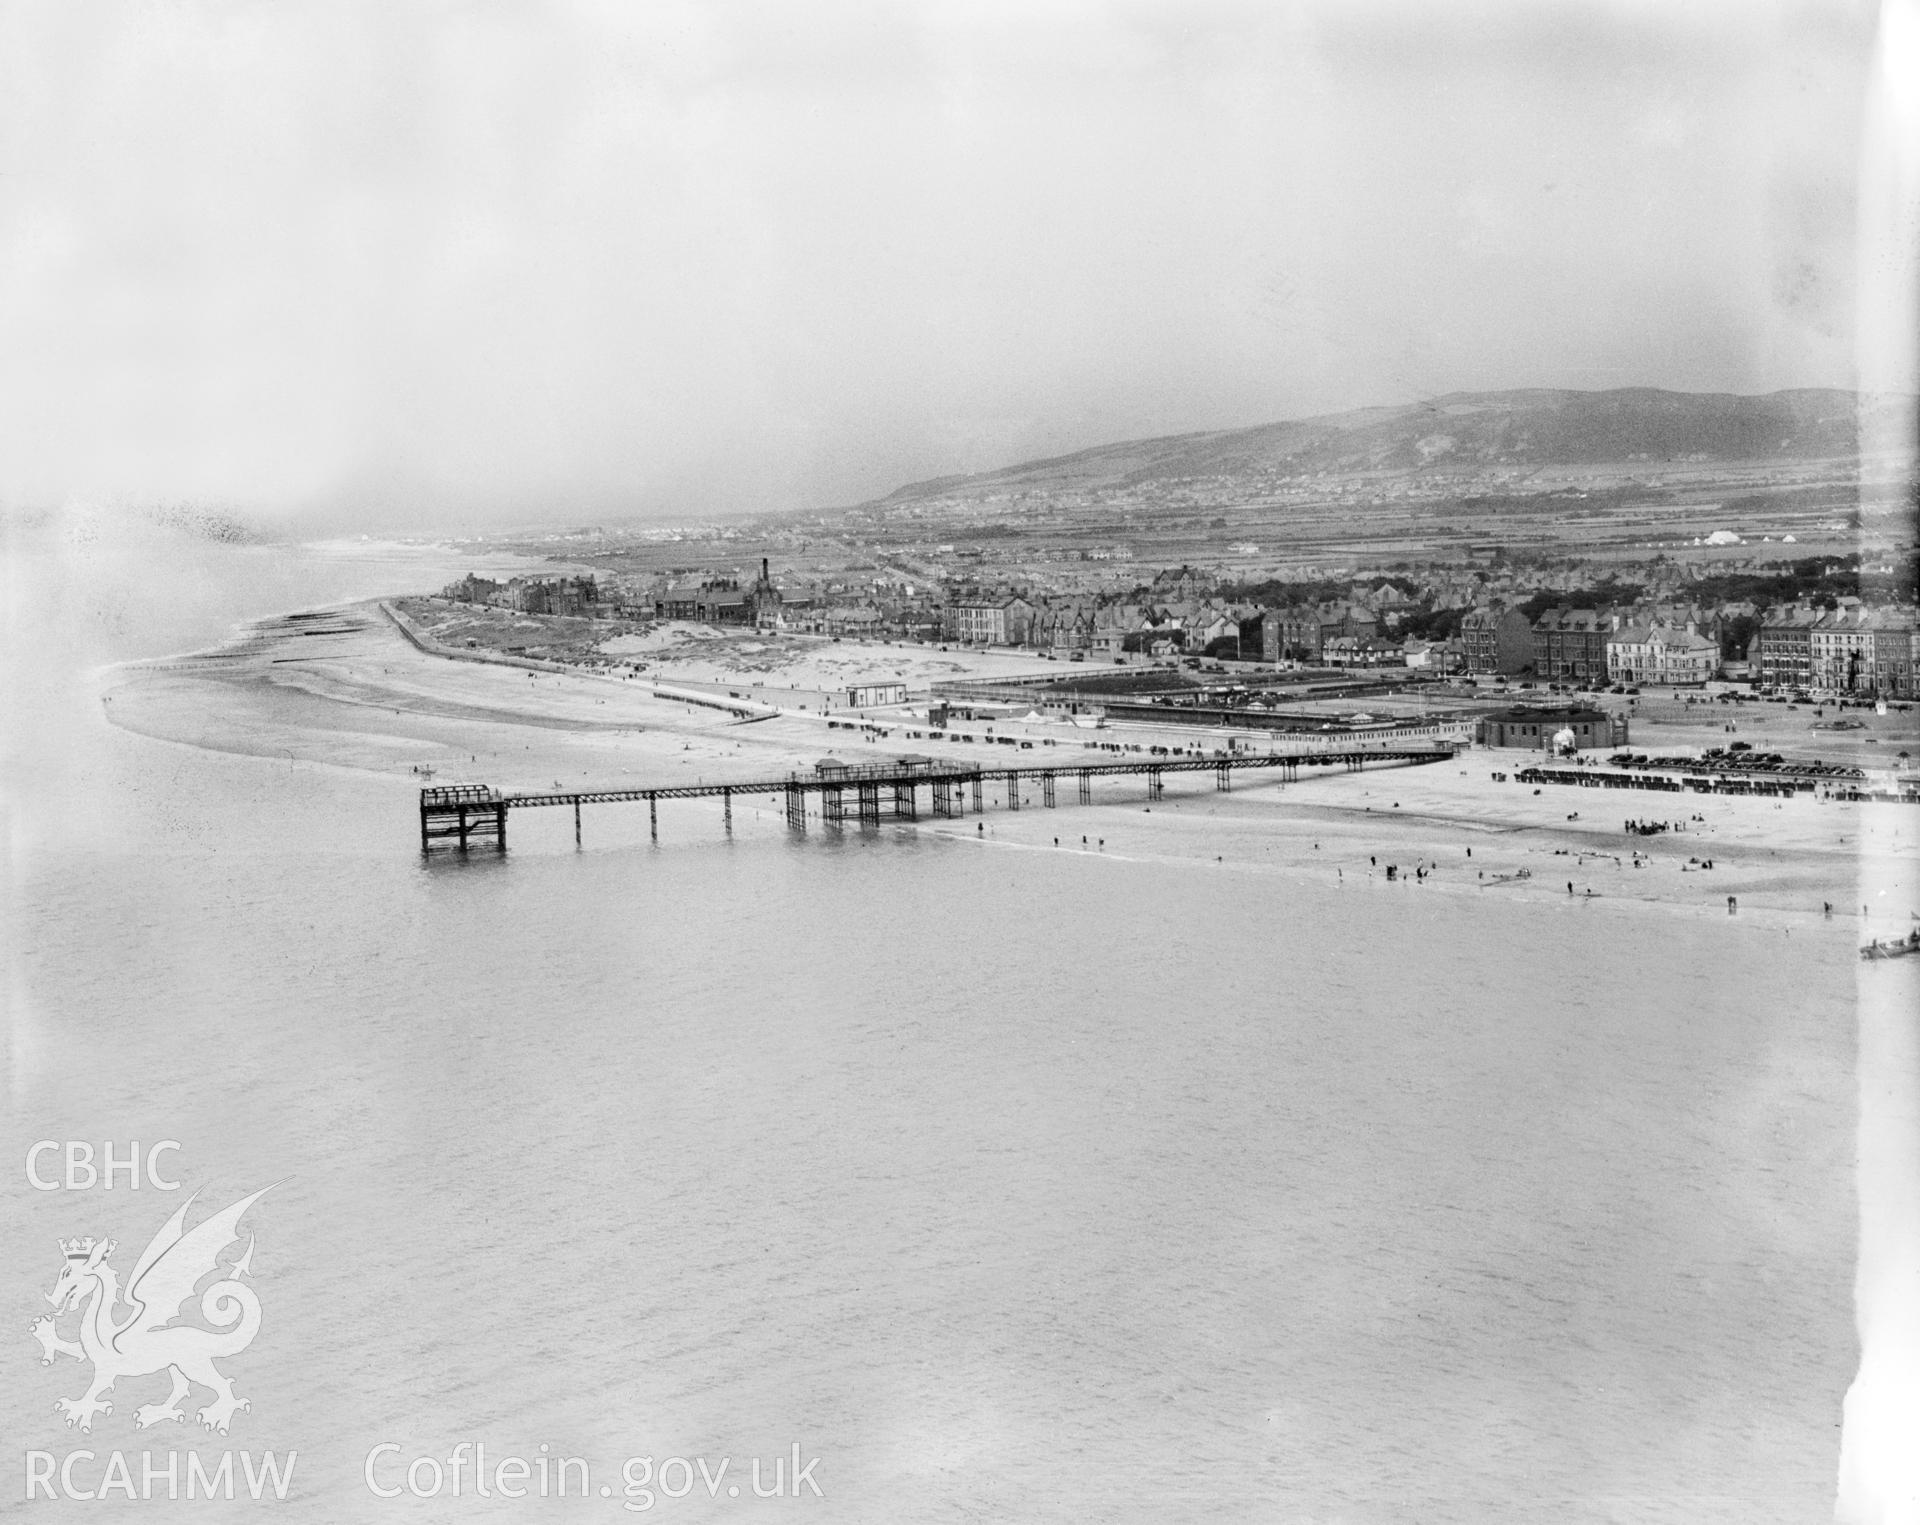 View of Rhyl showing pier, oblique aerial view. 5?x4? black and white glass plate negative.